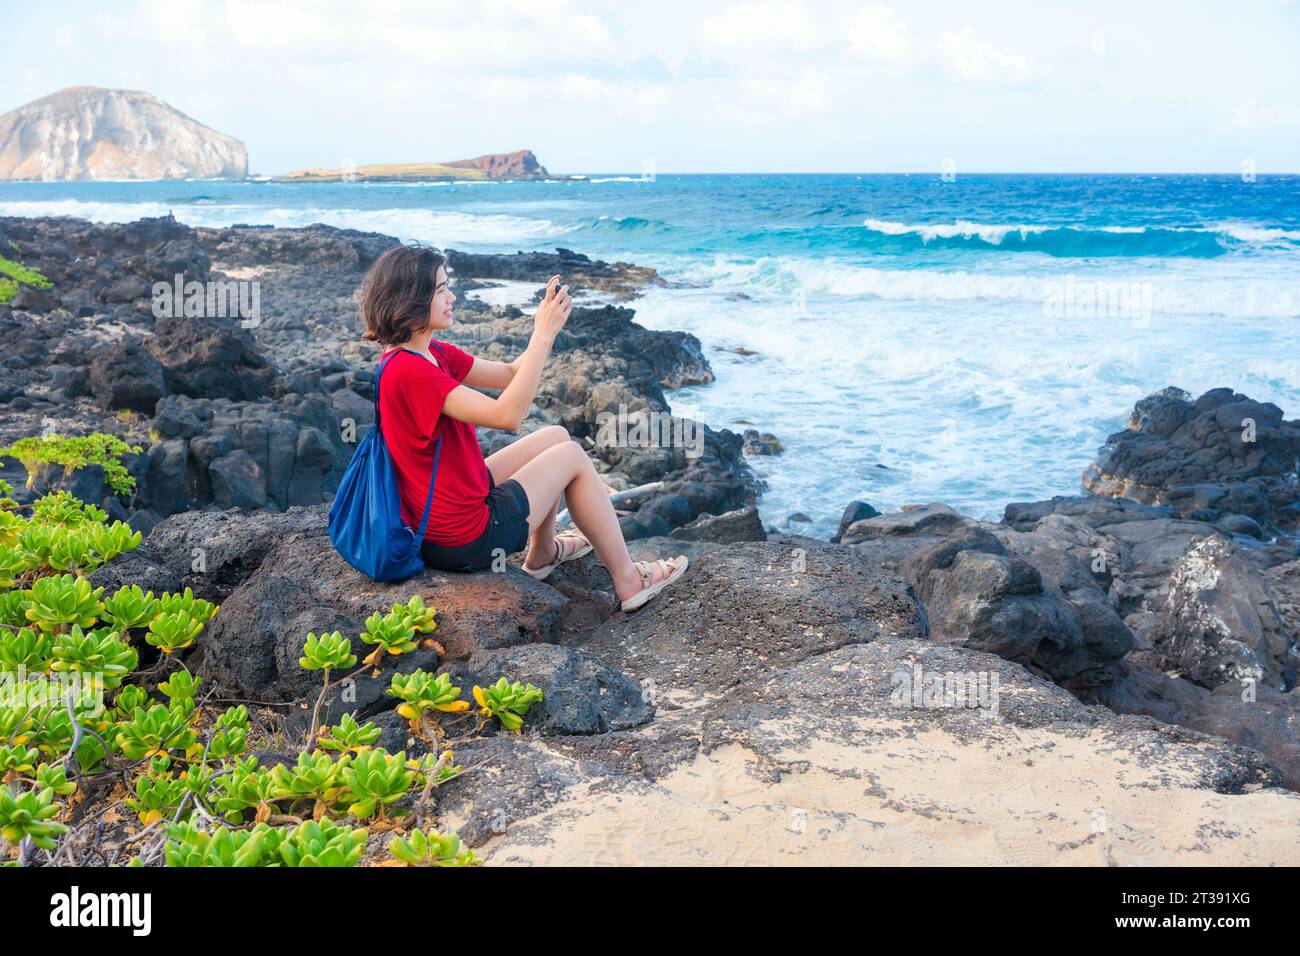 Young woman sitting on lavarocks along the Hawaiian ocean at Makapu'u beach taking pictures with cellphone Stock Photo